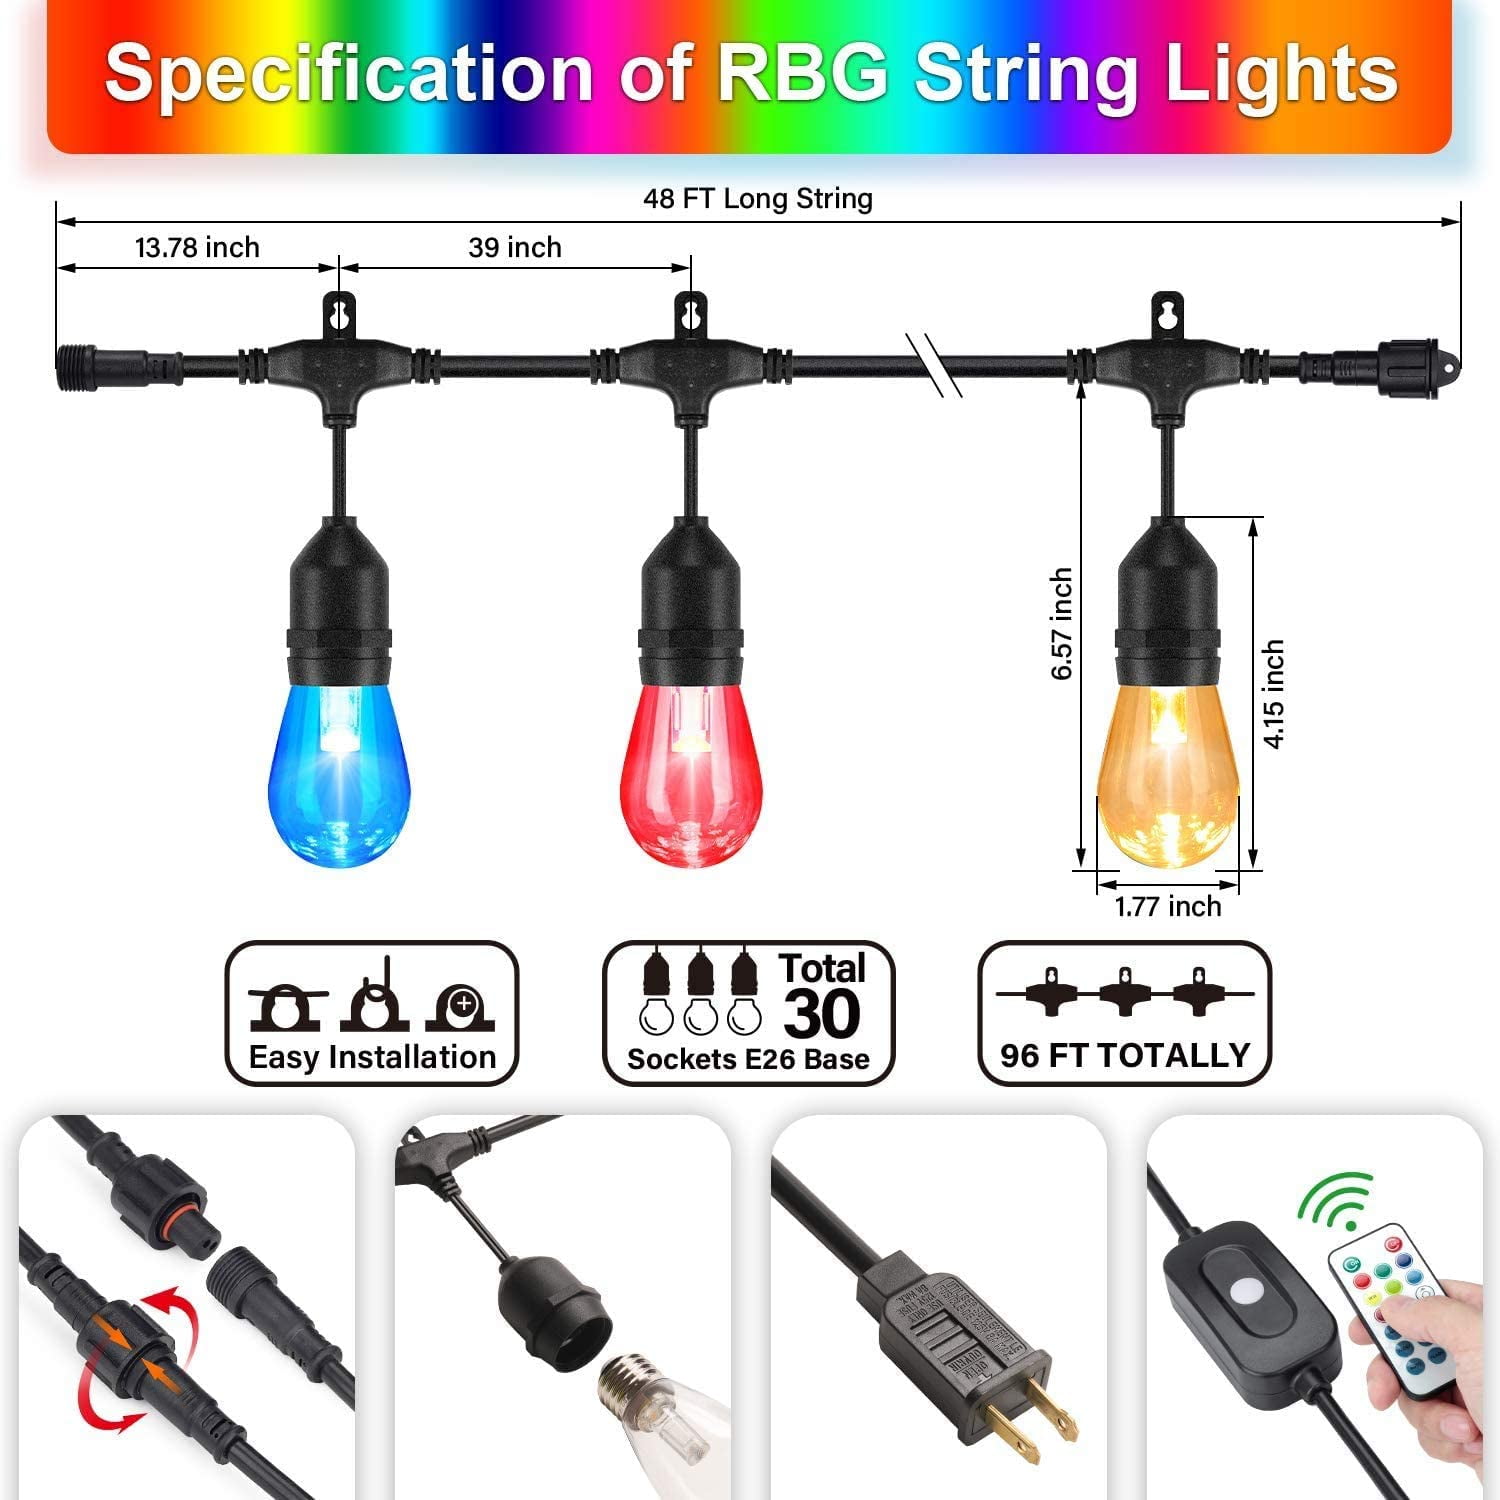 2-Pack 48FT Outdoor RGB String Lights Cafe LED String Light with 30+5 E26 Sha... 